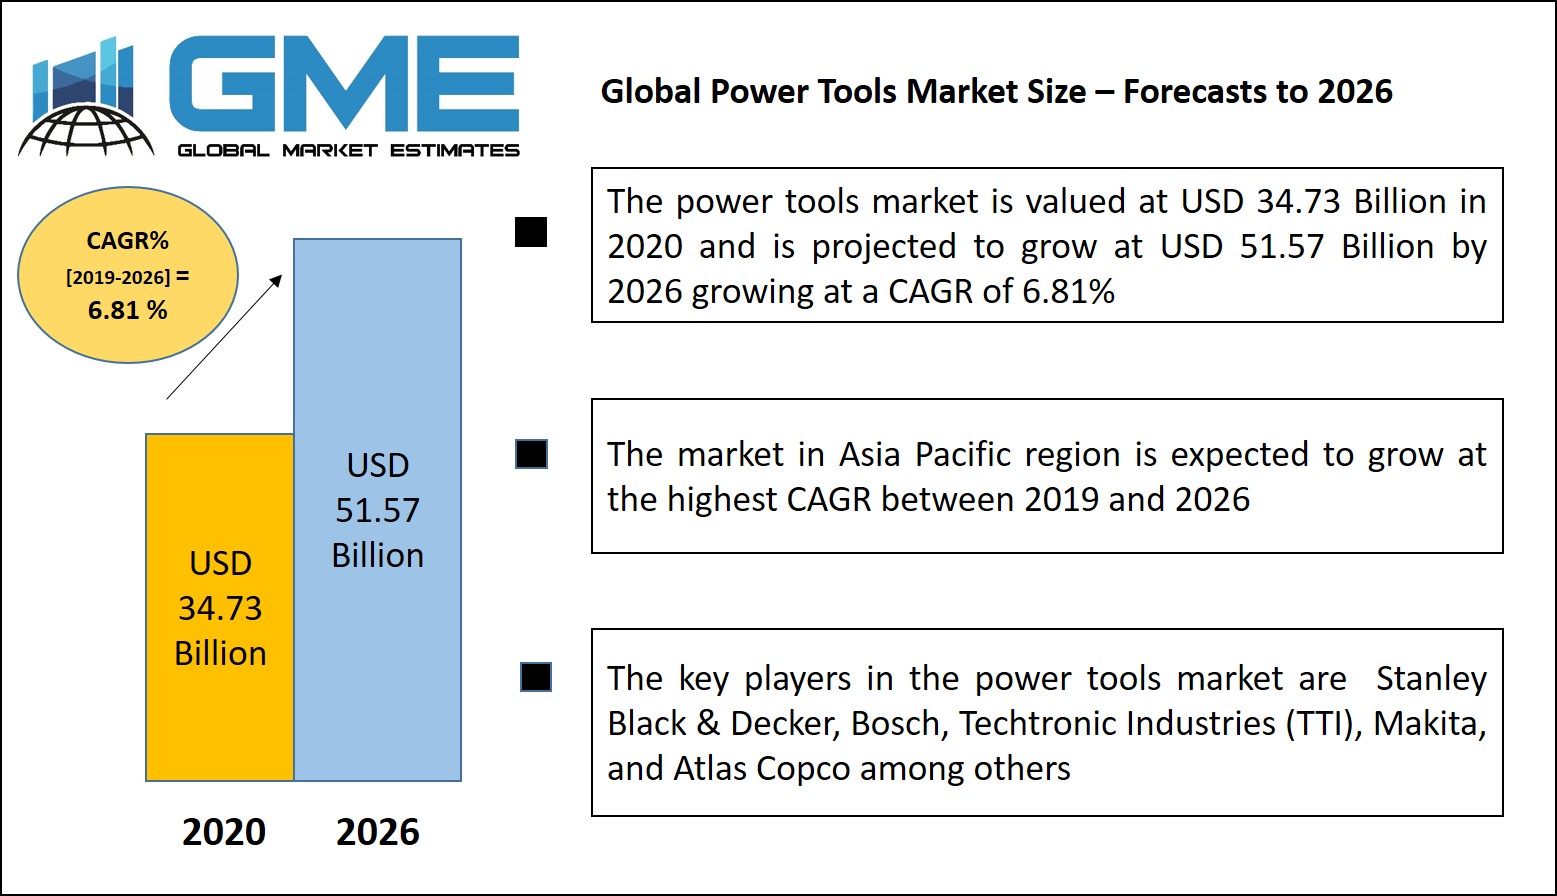 Global Power Tools Market Size – Forecasts to 2026